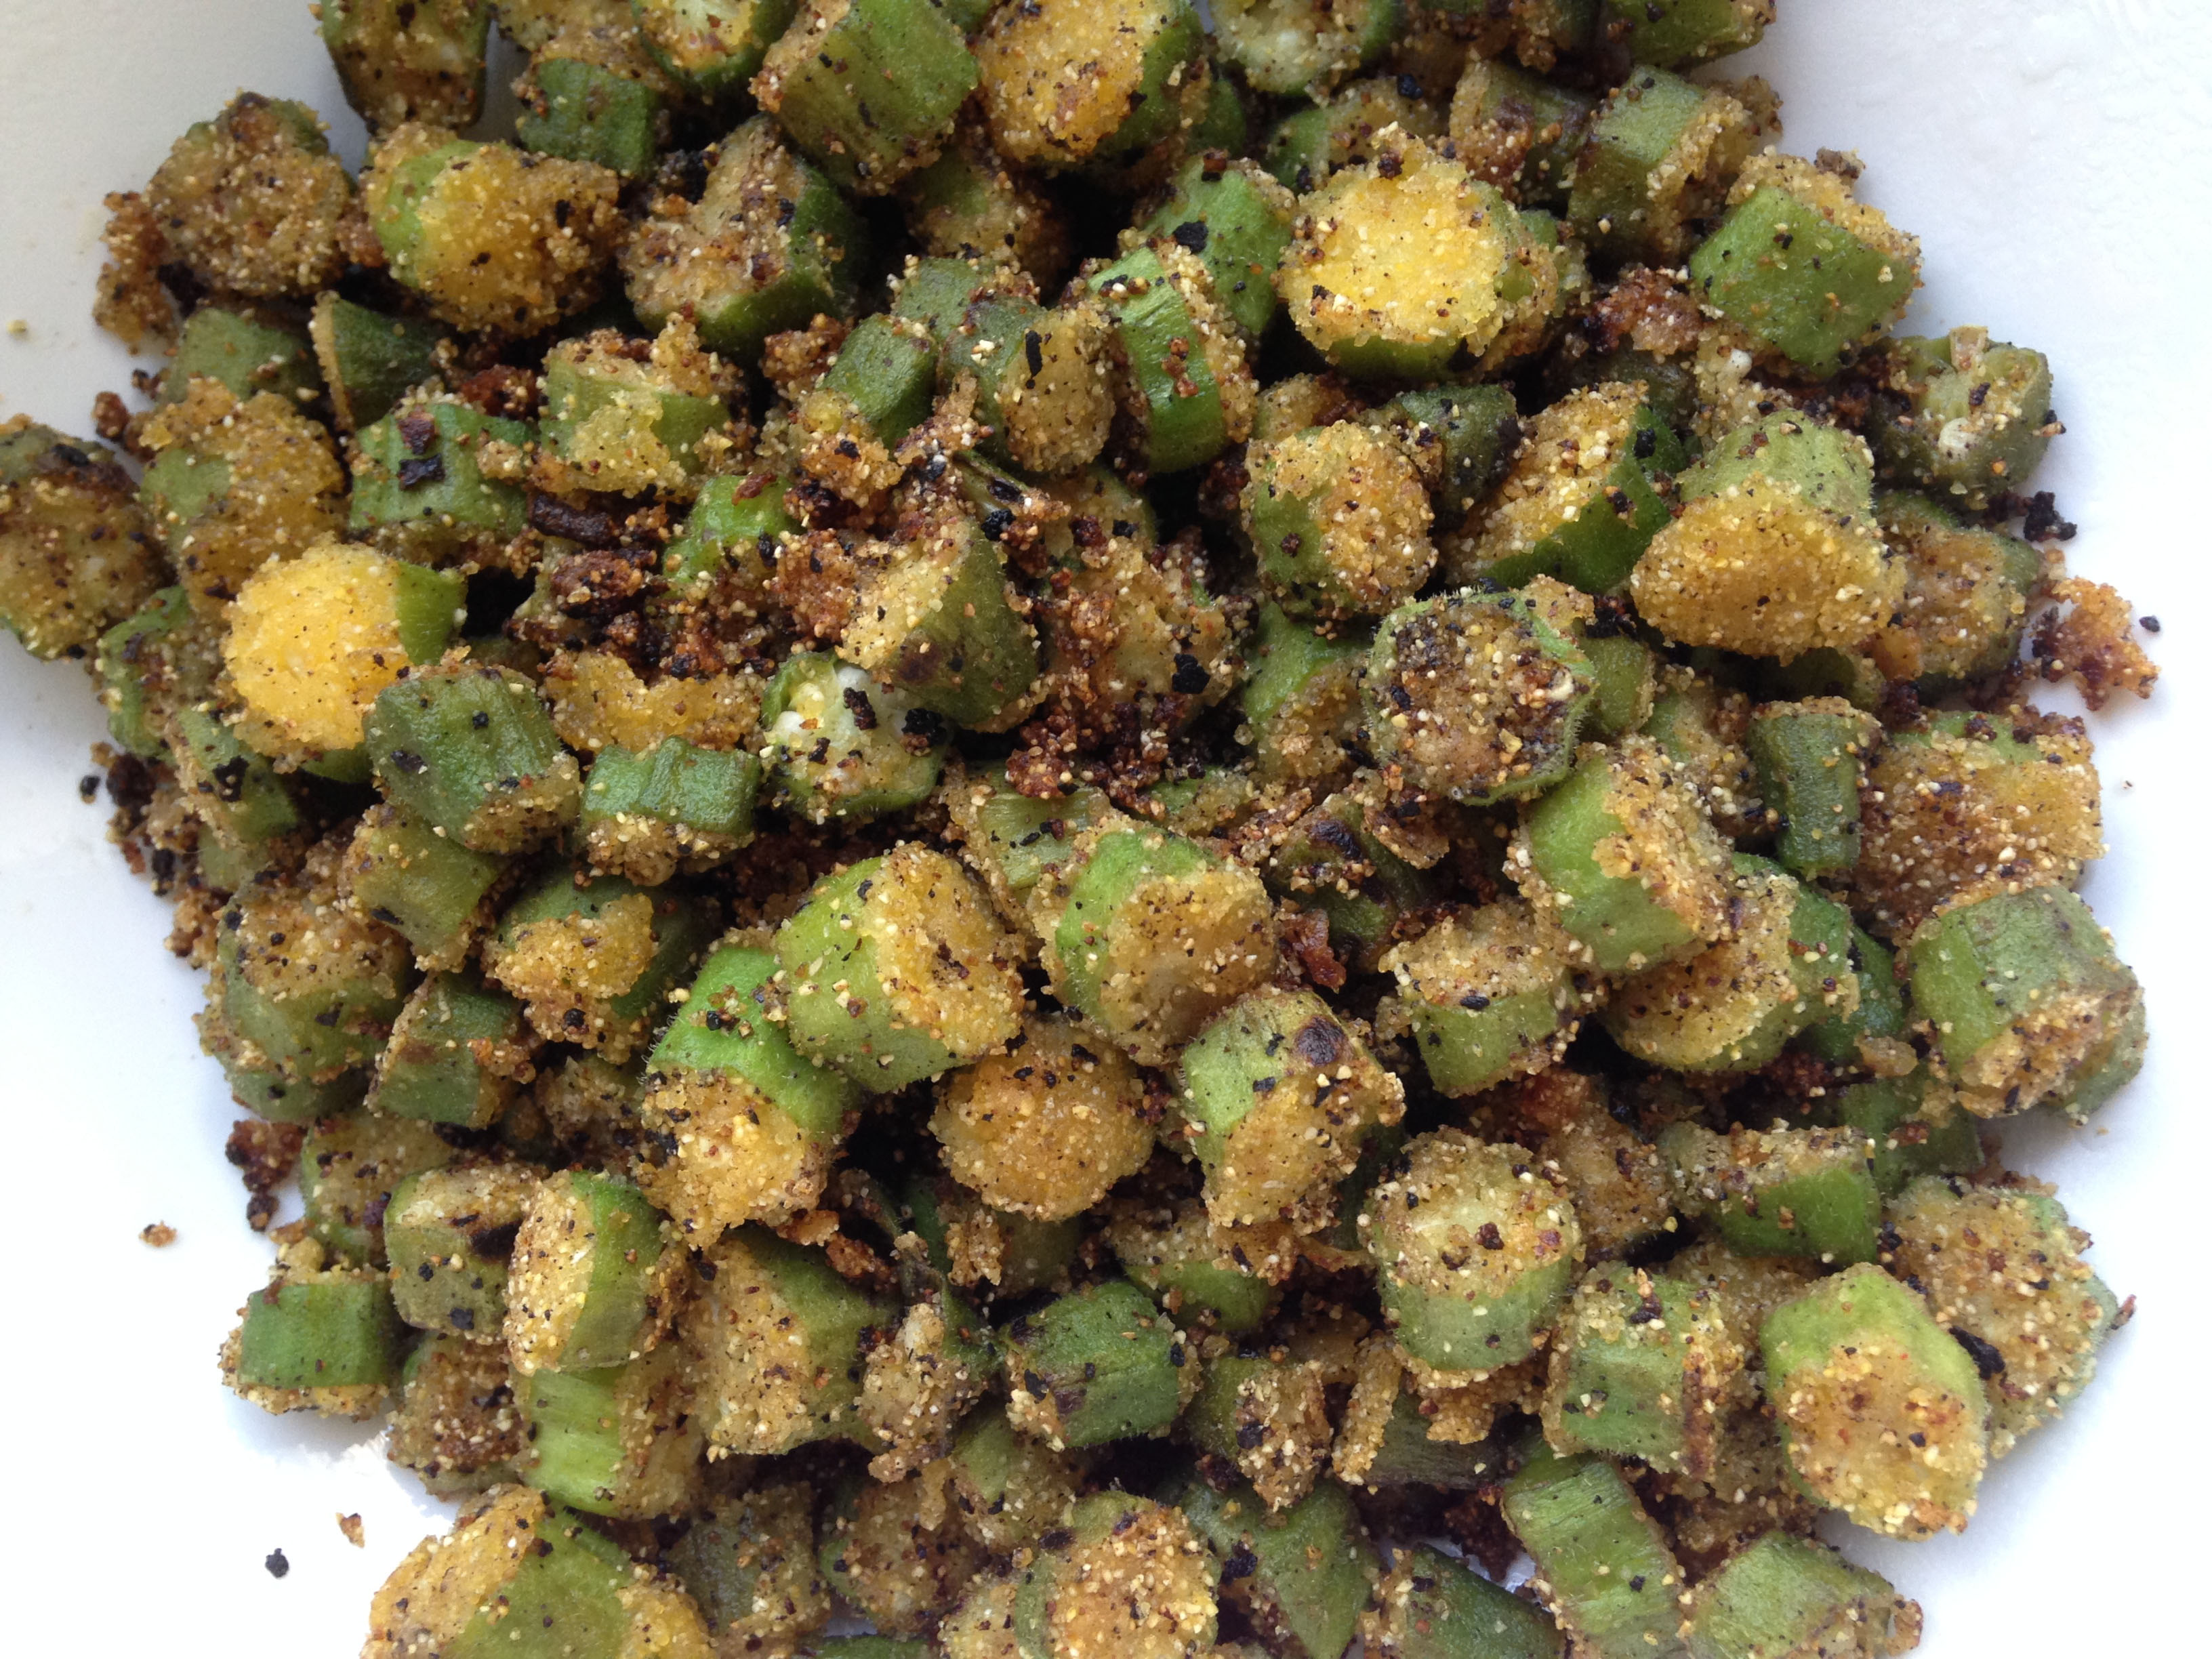 Fried Okra and Other Goodies From The Farm